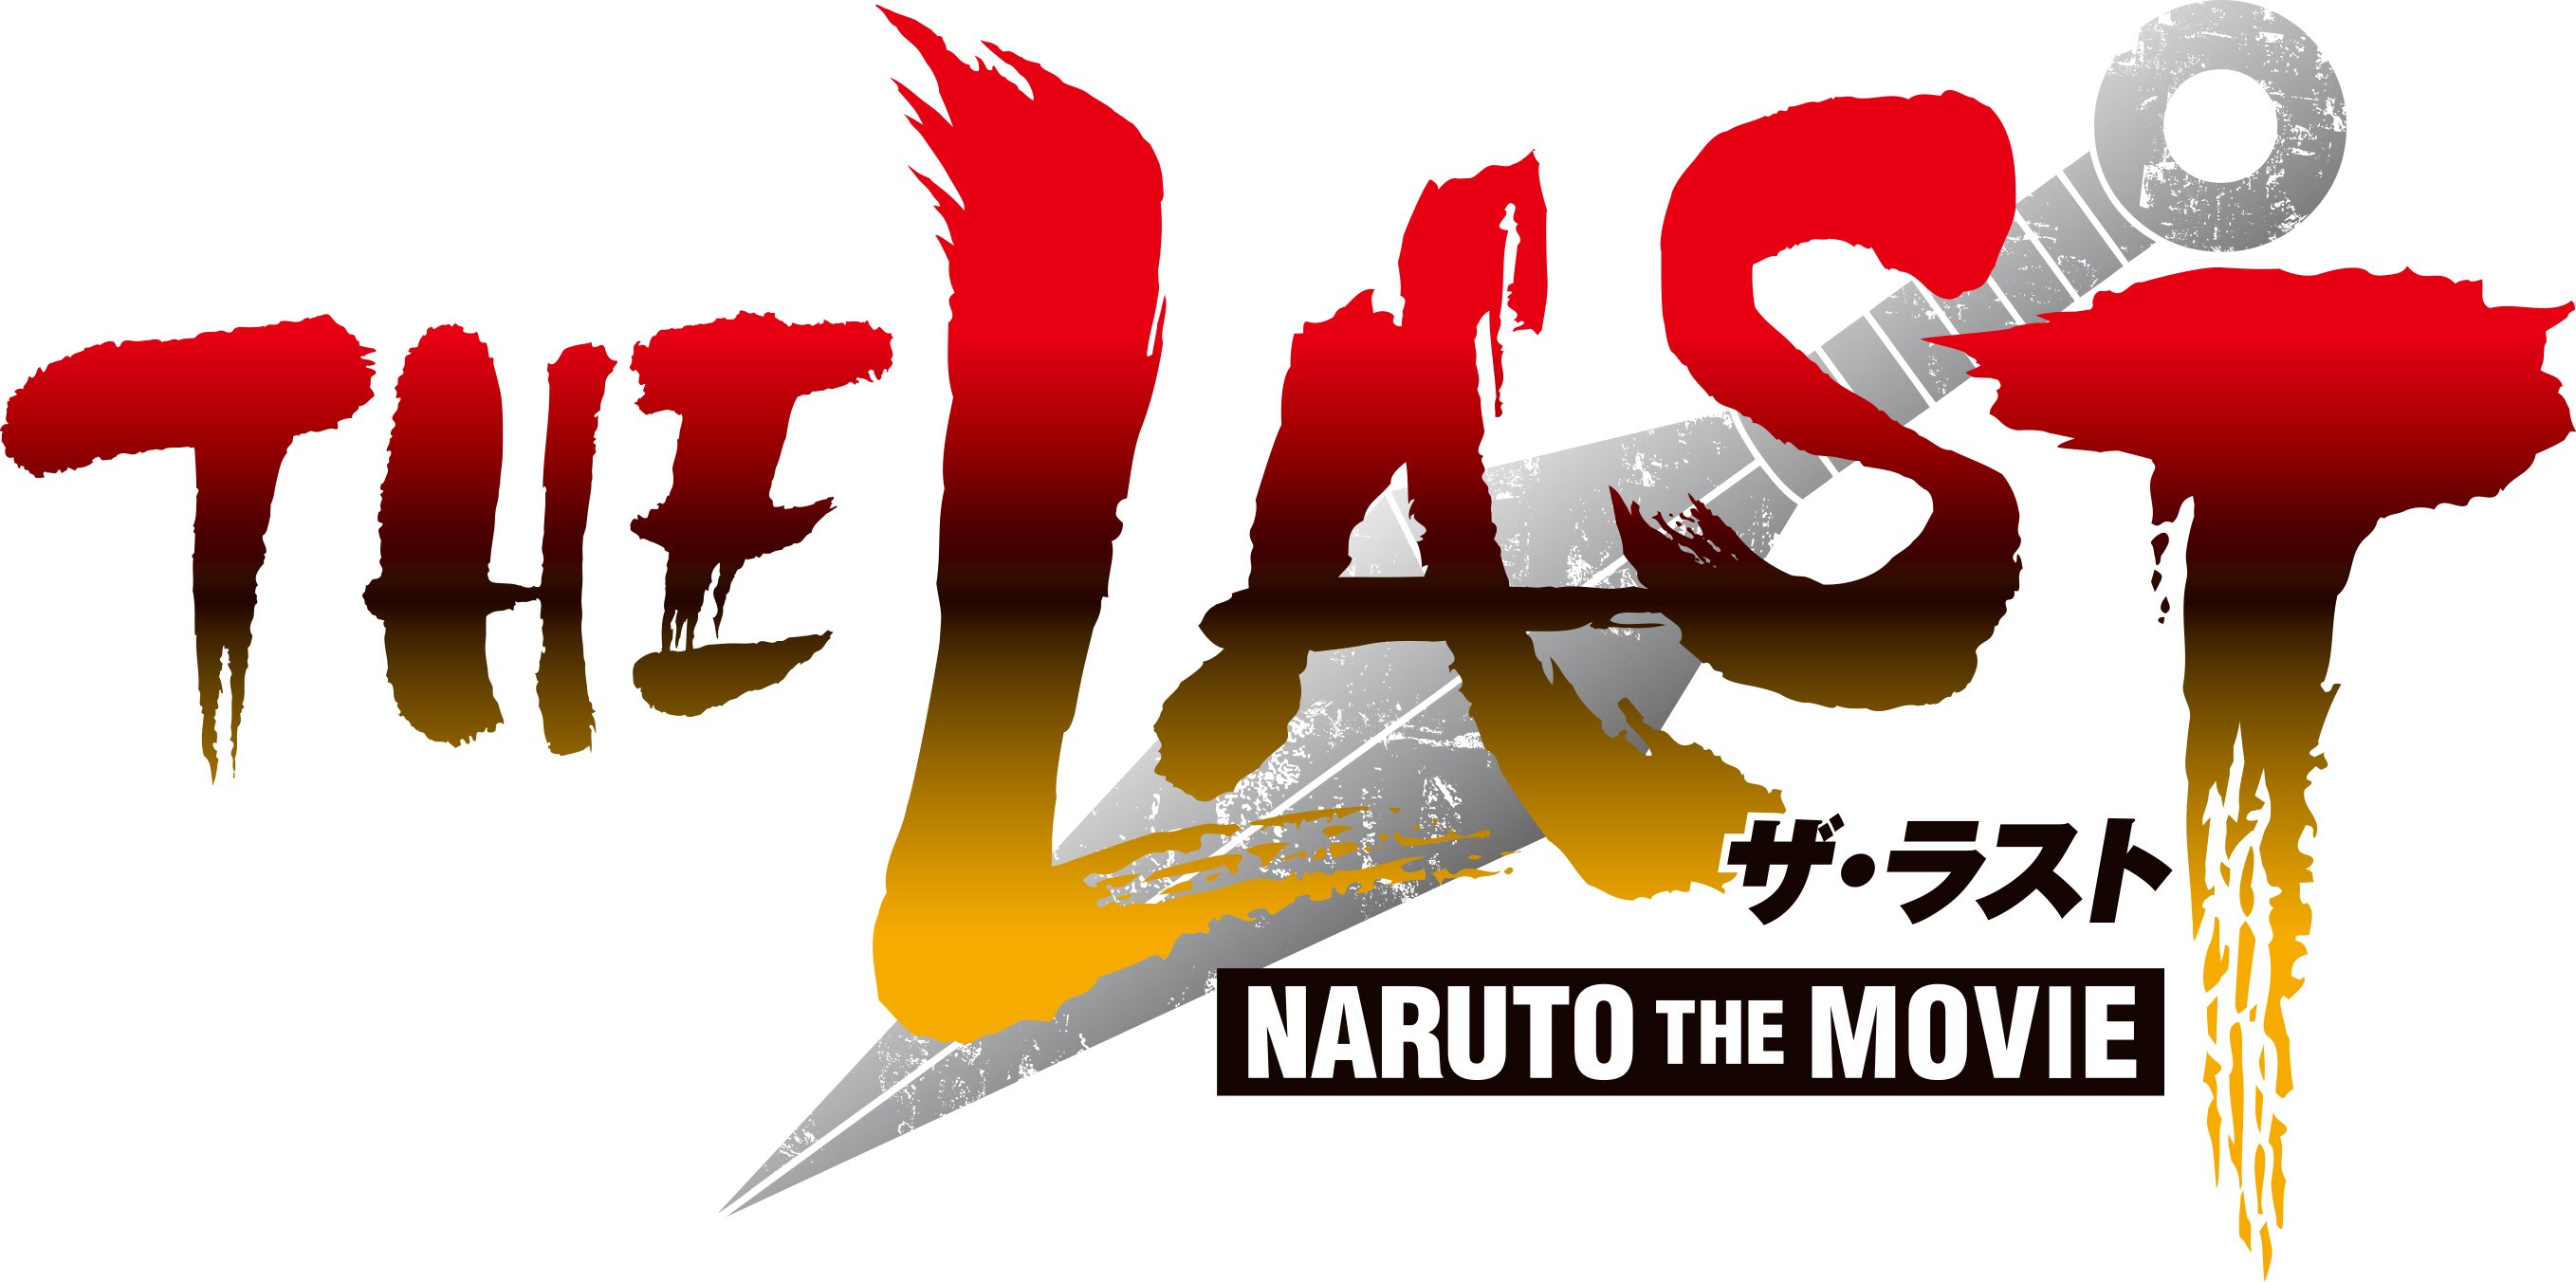 The Last: Naruto the Movie teaser